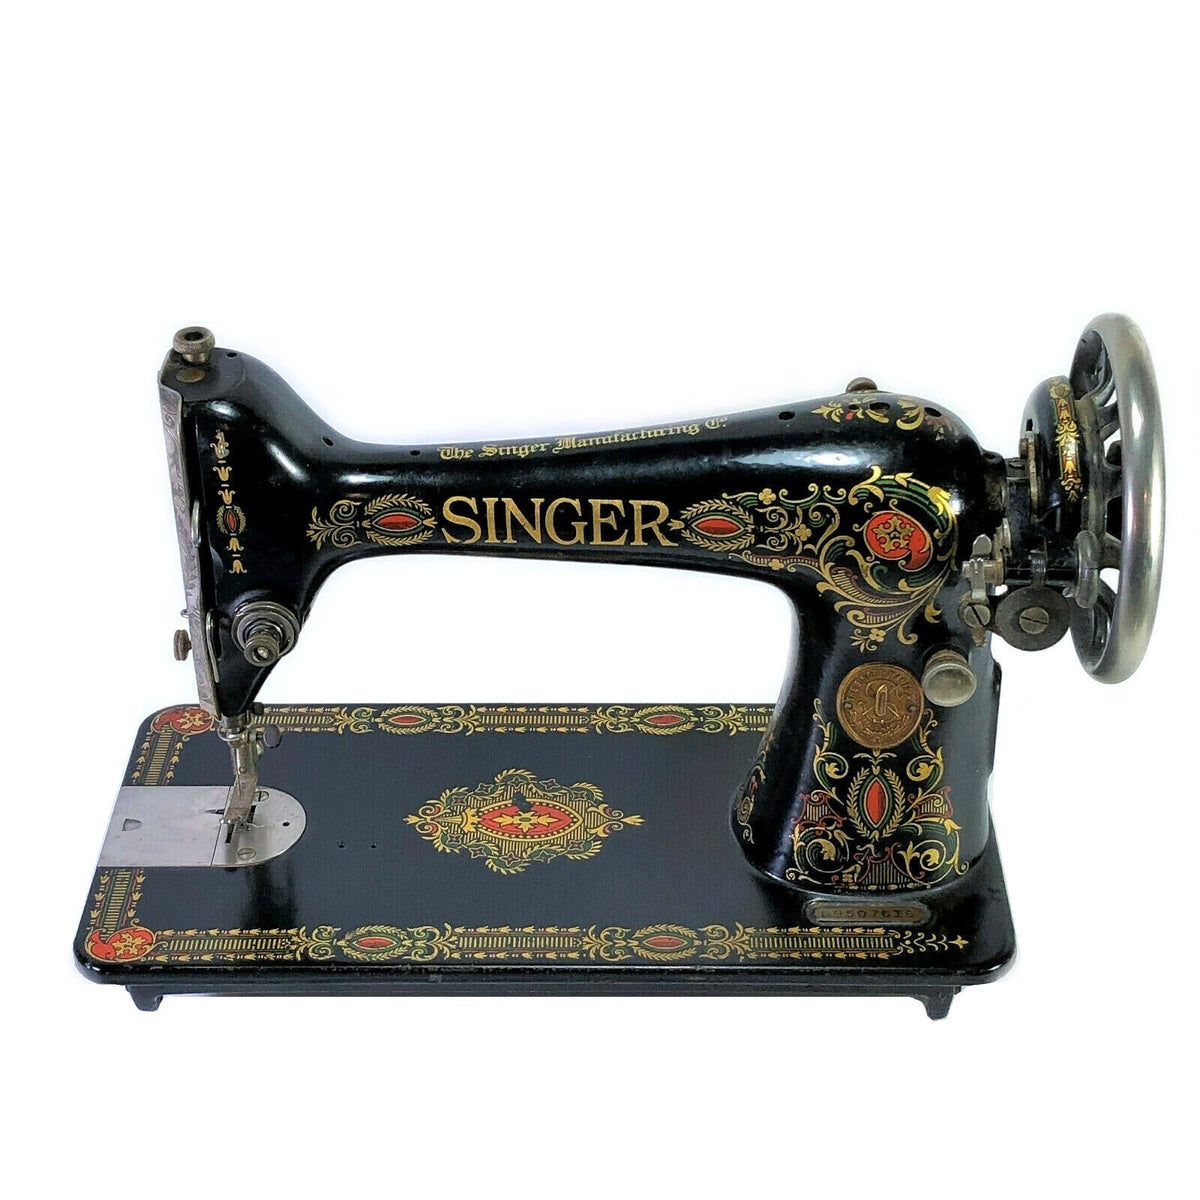 Thread Stand - Old Iron for Singer 15, 66, 201 and many Singer